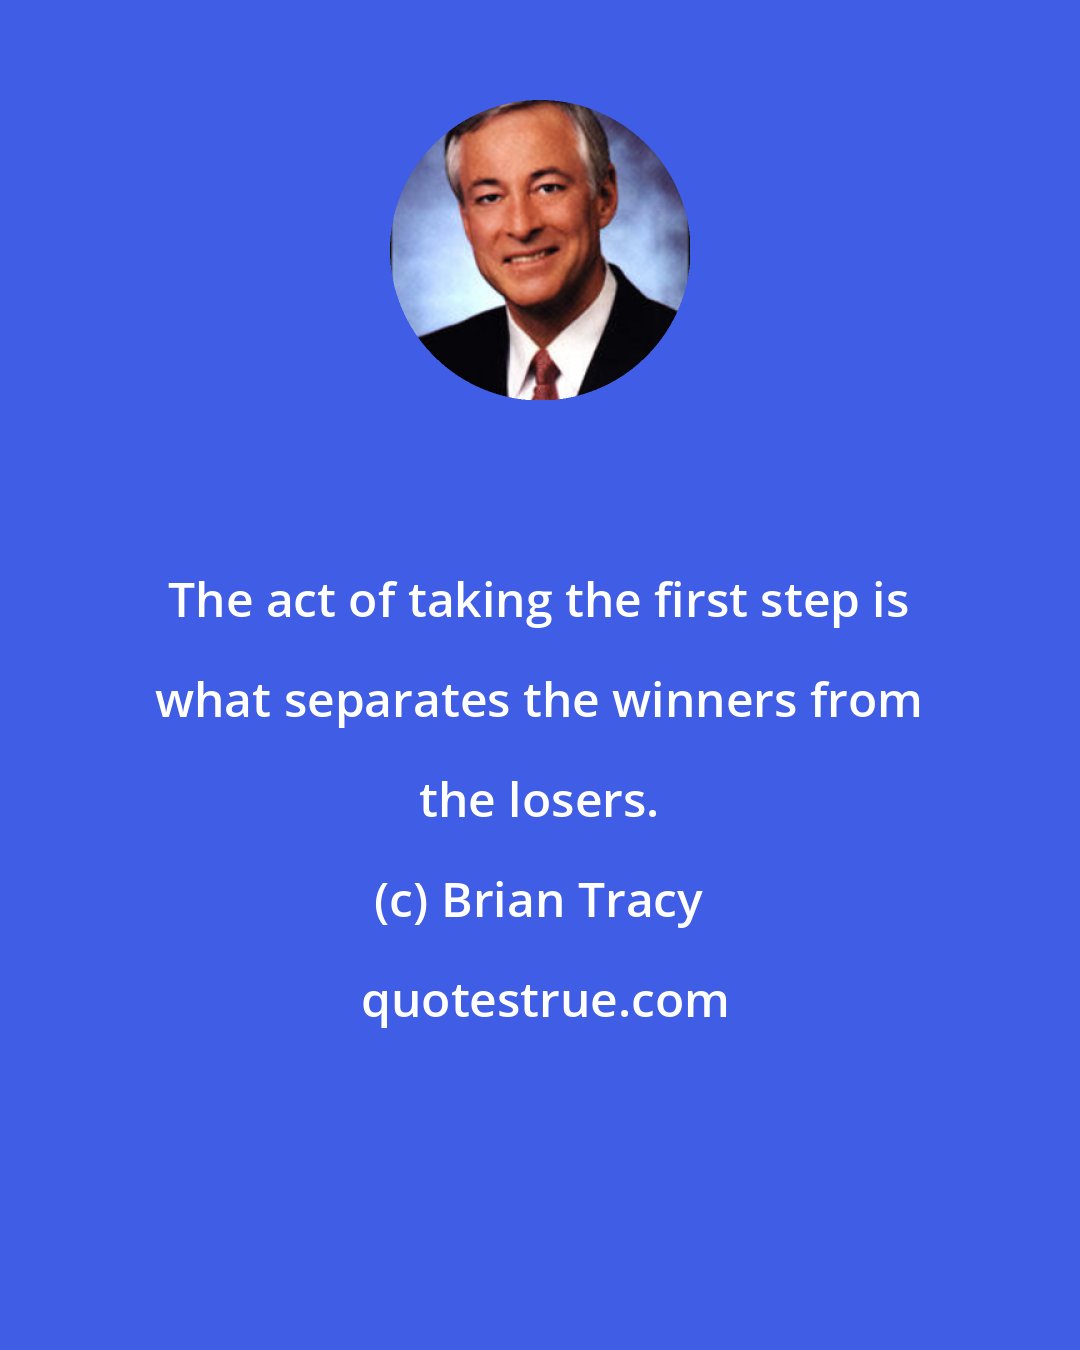 Brian Tracy: The act of taking the first step is what separates the winners from the losers.